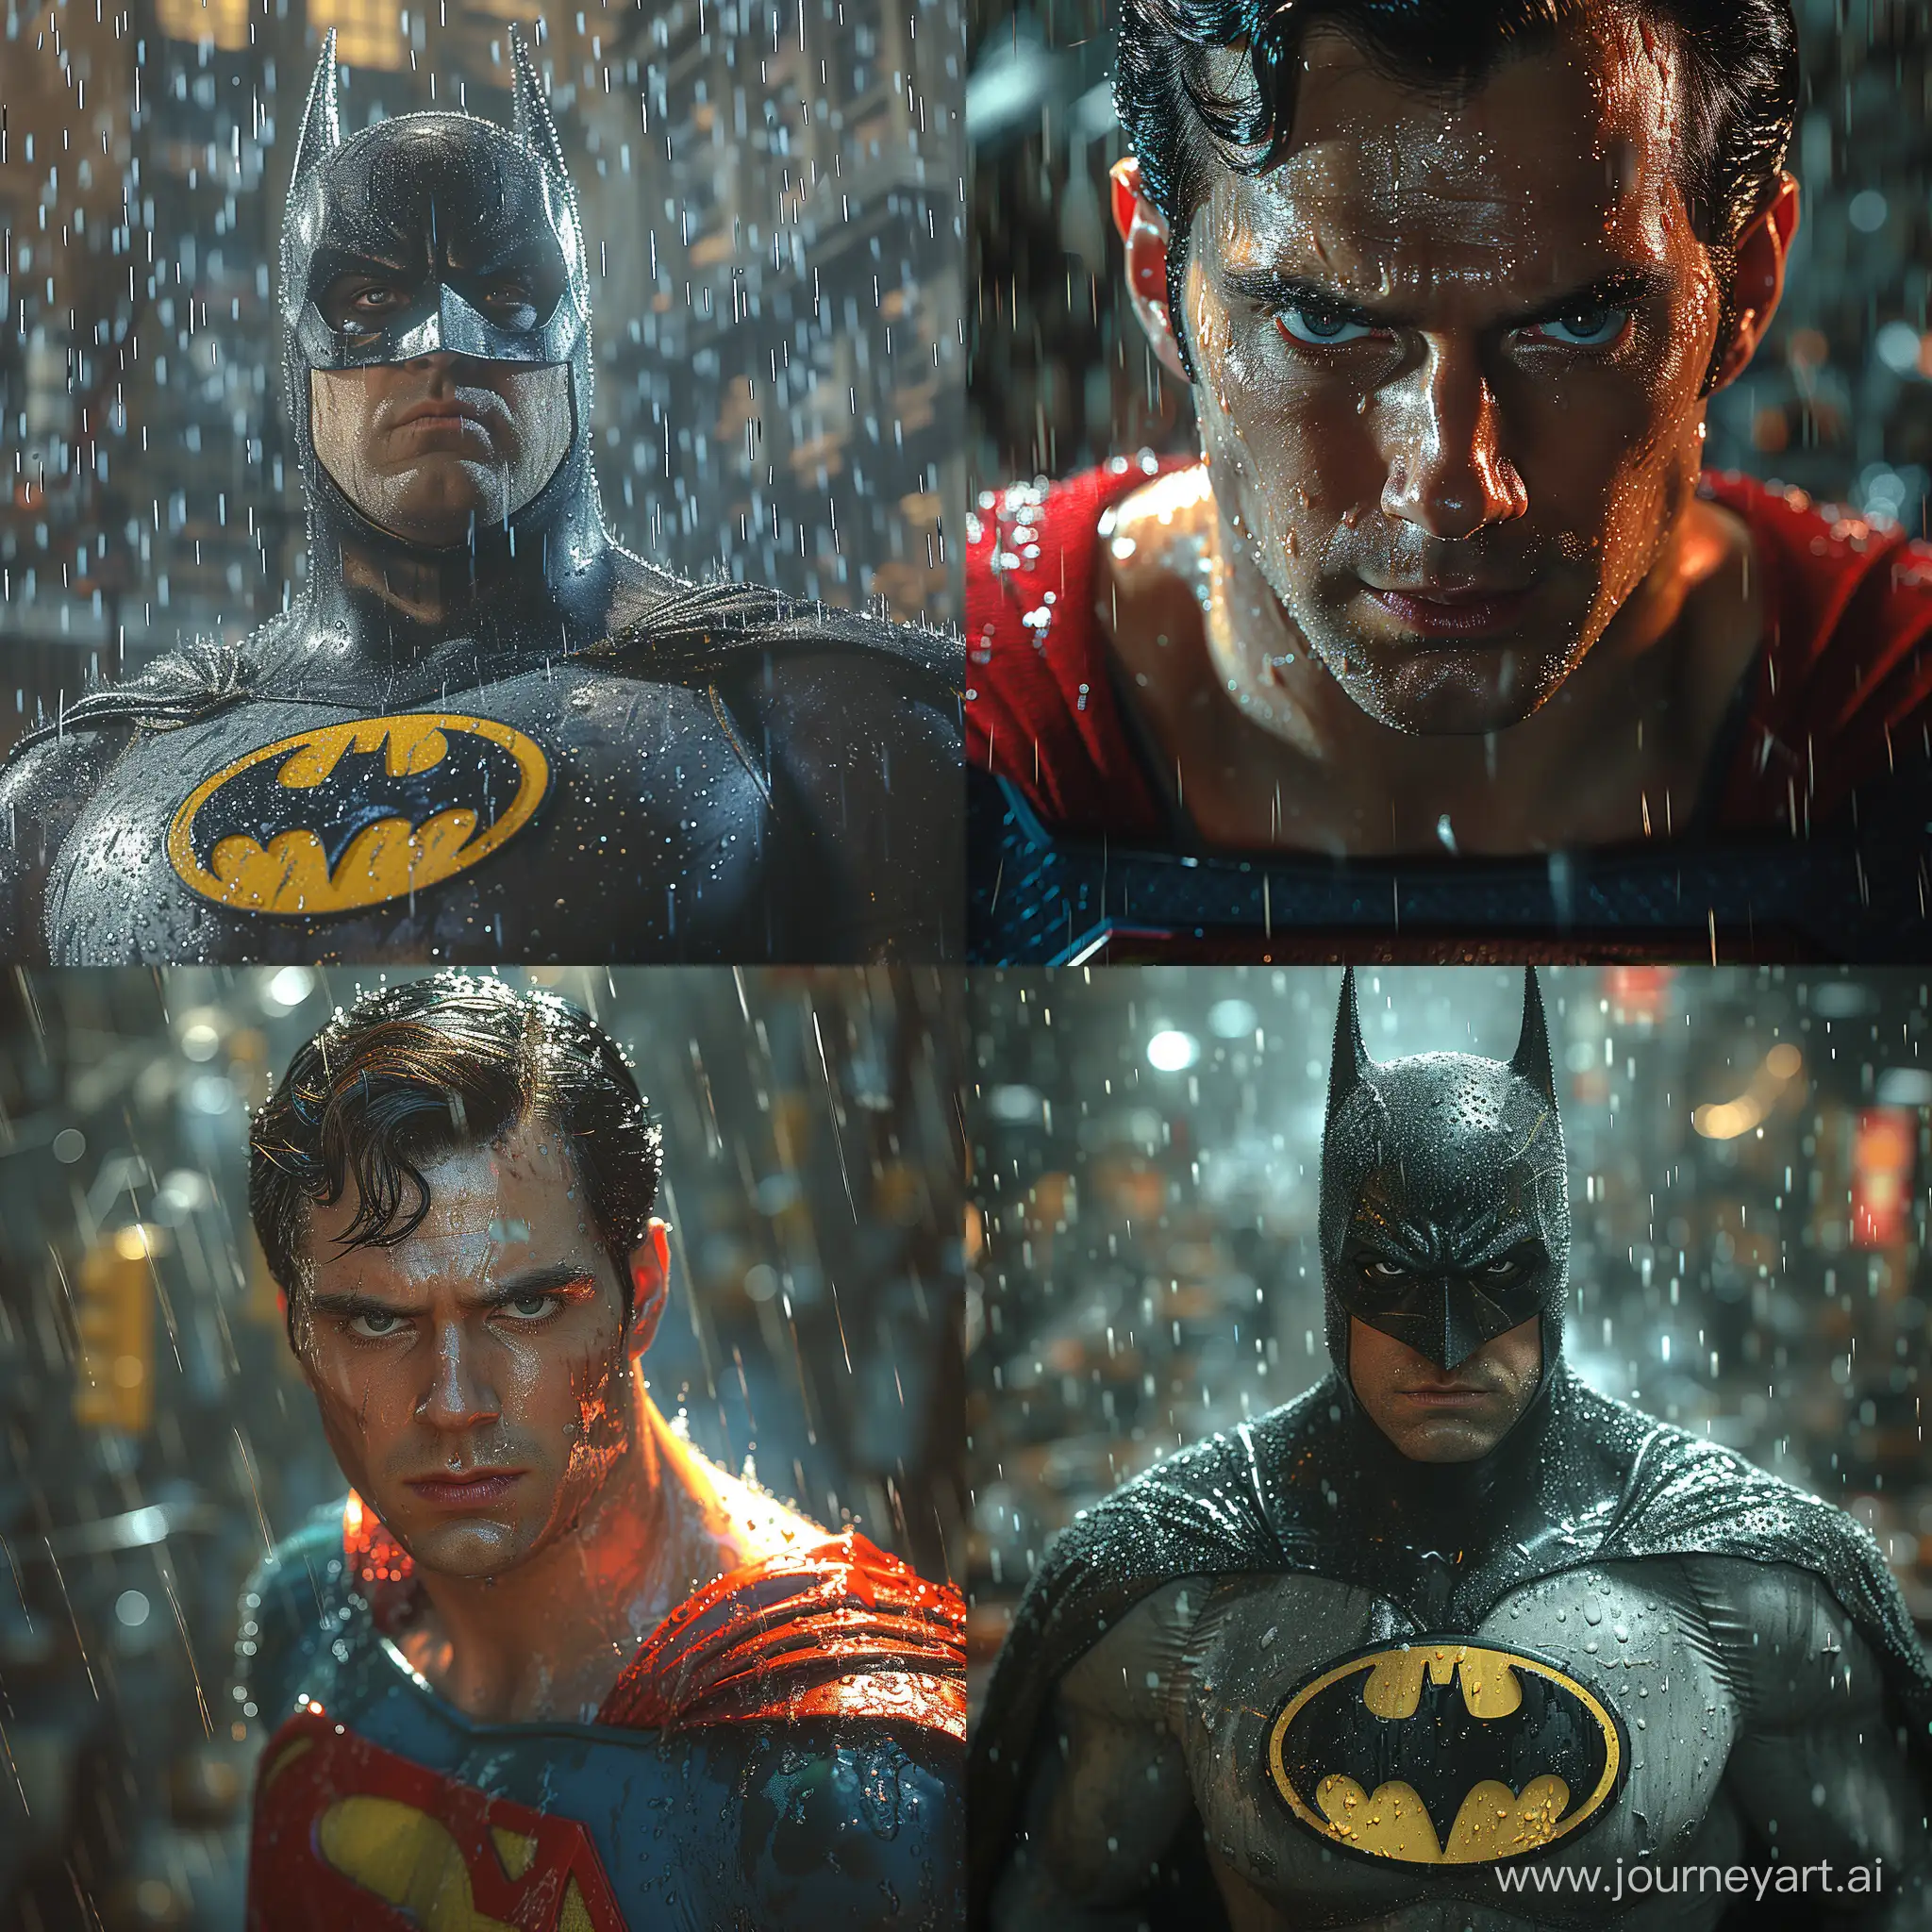 Create a realistic and dynamic image of the super man in Gotham City, with a close-up depth of field, set in the rain. The image should capture the essence of Gotham City's atmosphere and the super man's character, incorporating a stylized approach. Pay attention to detail and realism, and ensure that the image conveys a sense of drama and intrigue --stylize 750 --v 6